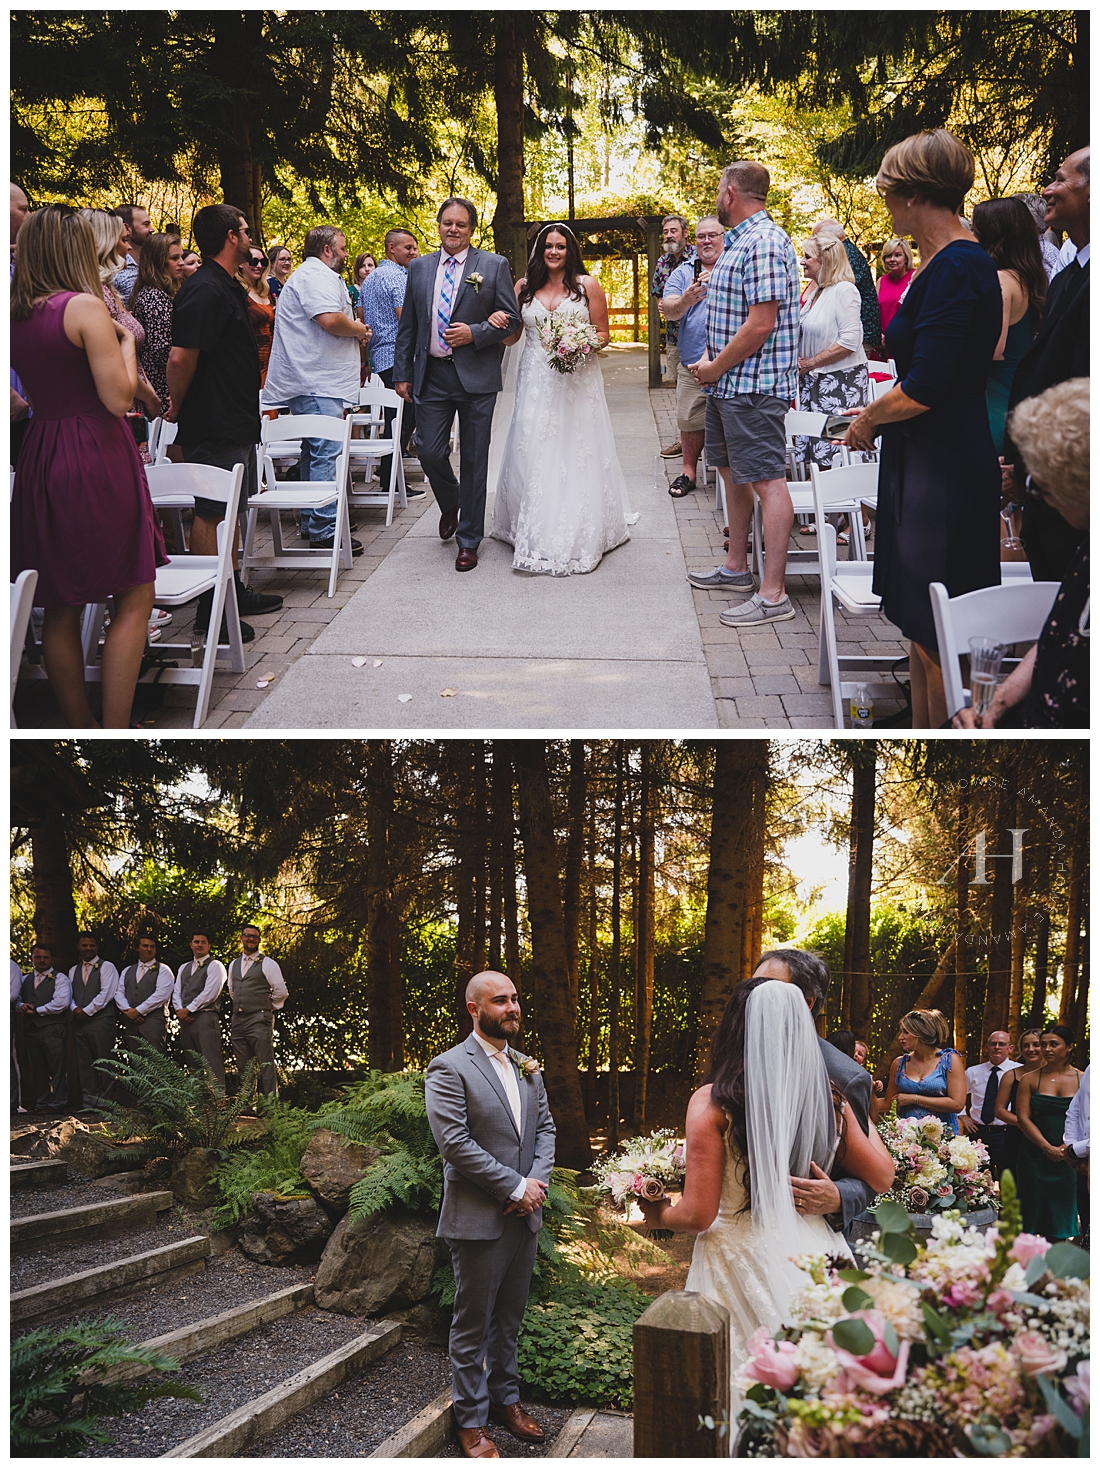 Walking Down the Isle Moment | Bride and Groom Ceremony Portraits | Photographed by the Best Tacoma Wedding Photographer Amanda Howse Photography